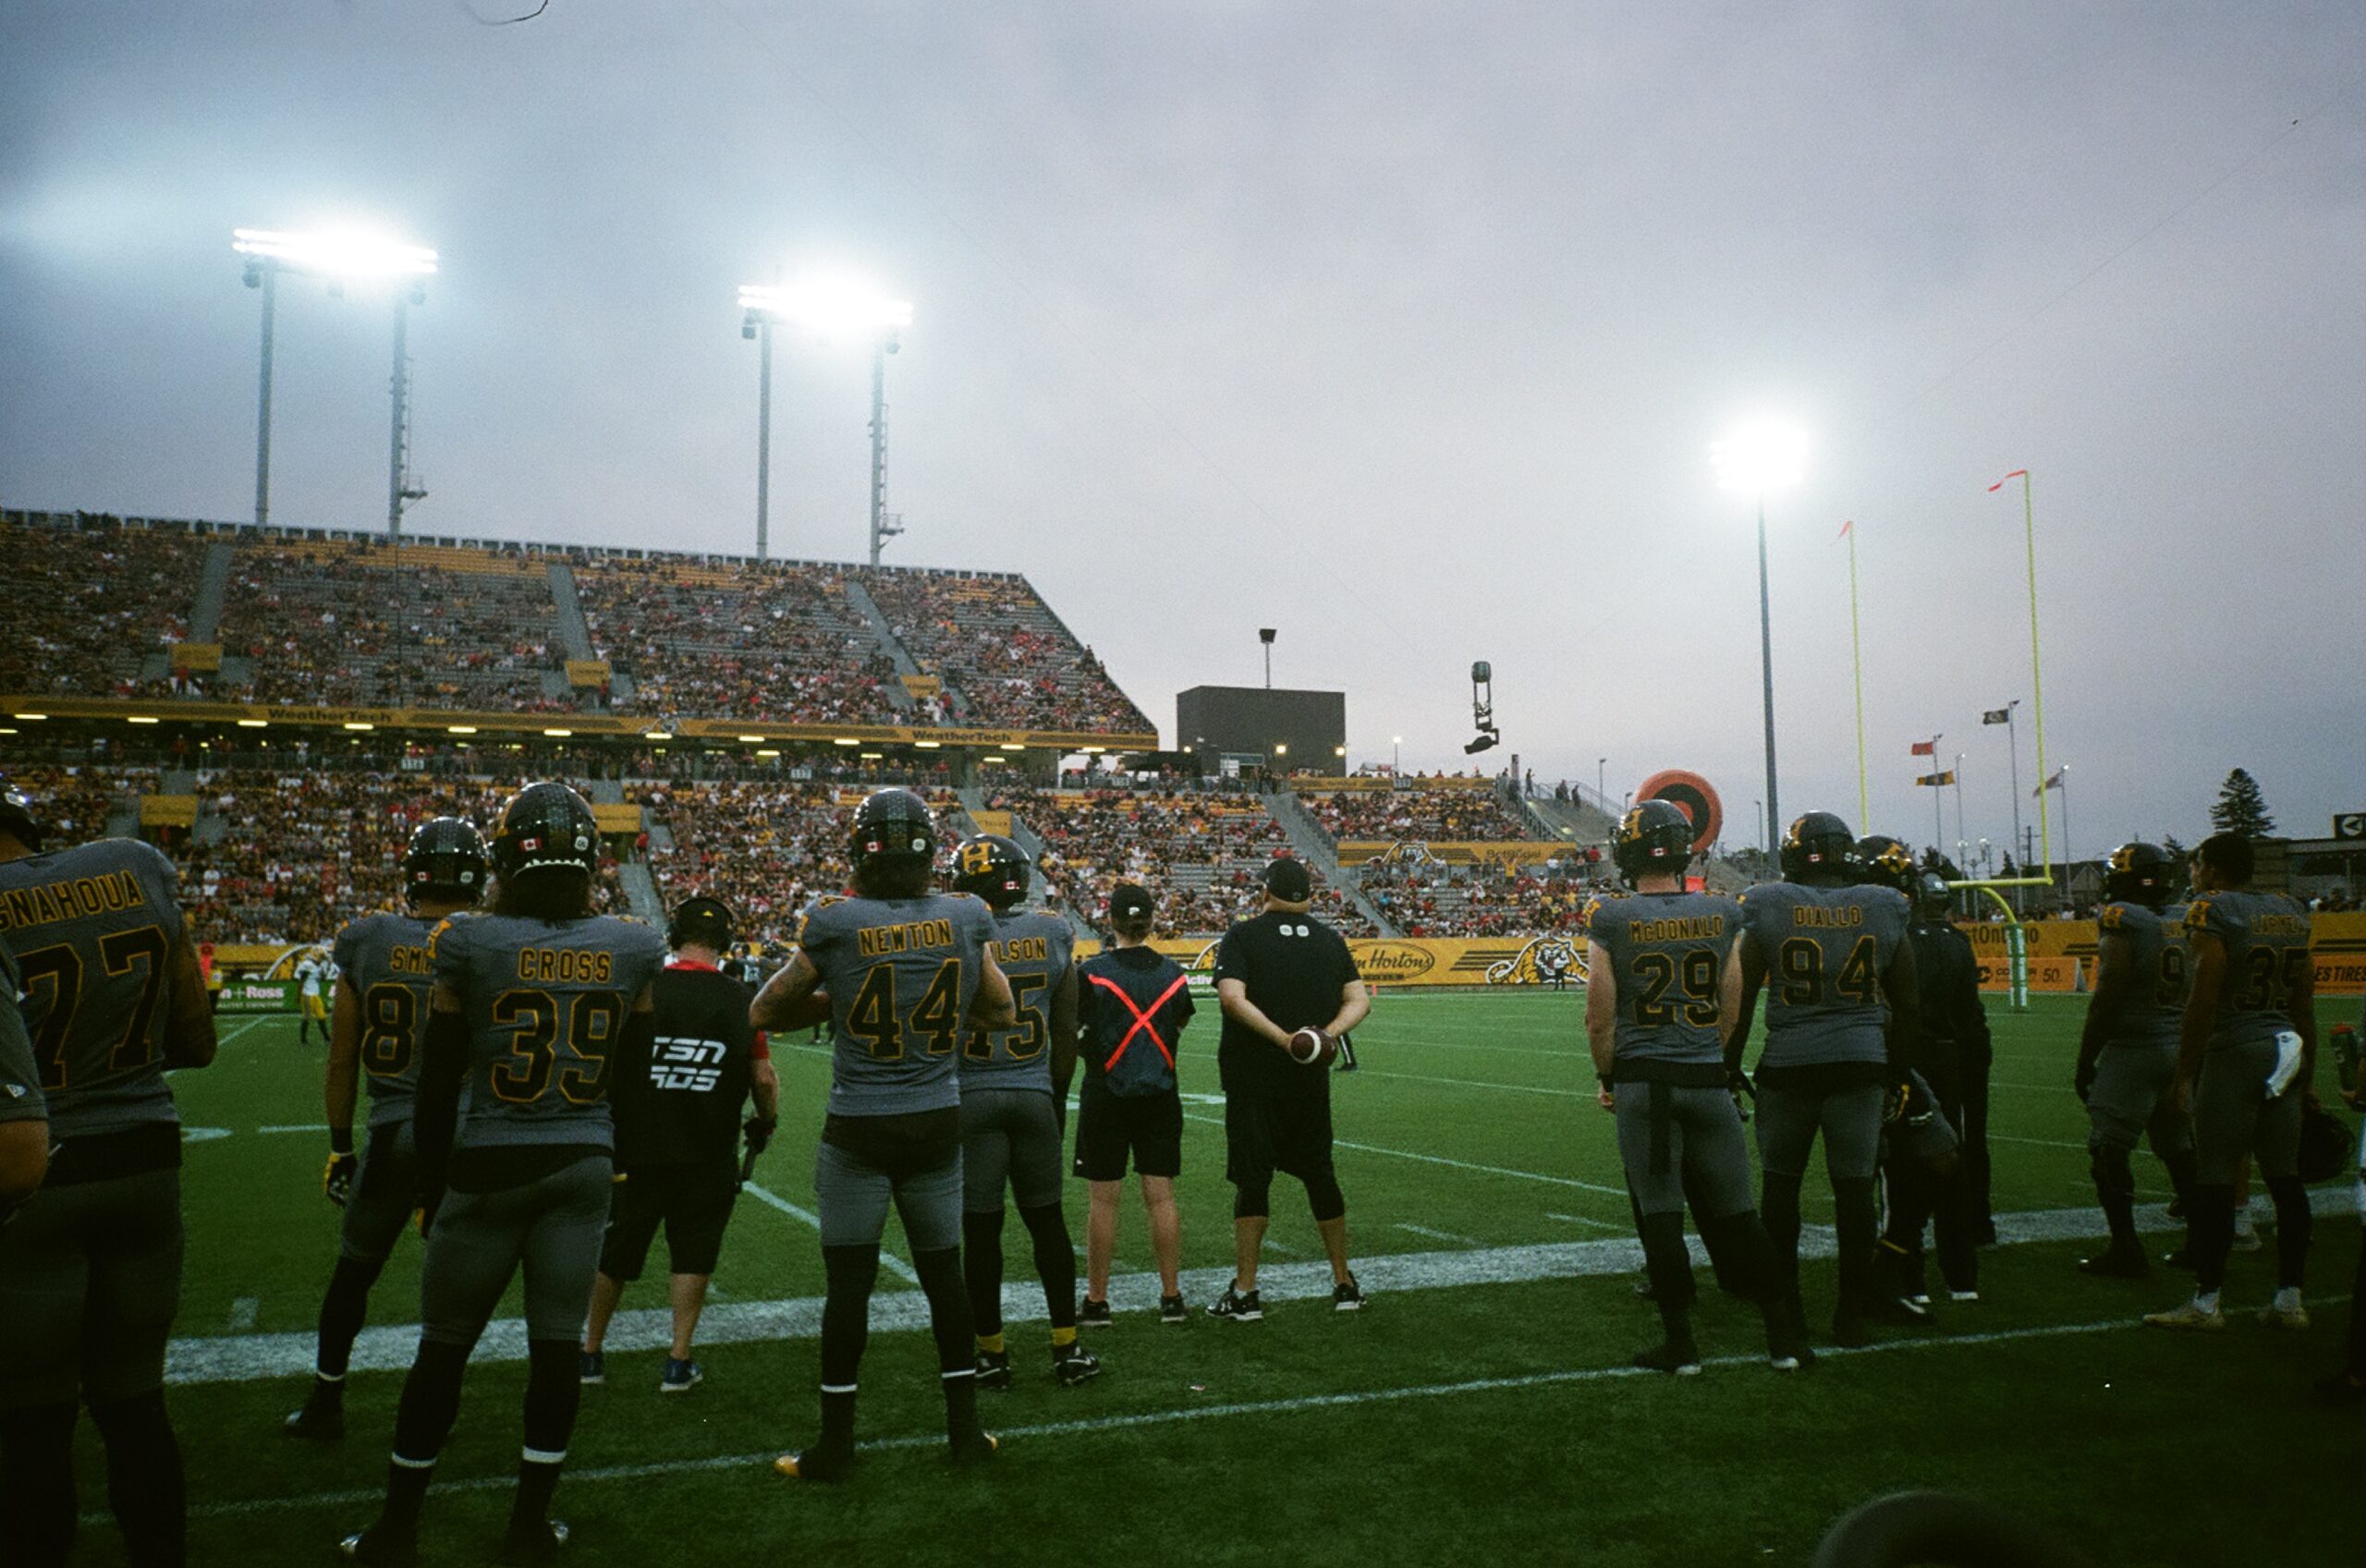 The Hamilton Tiger-Cats at Tim Hortons Field during their 2022 season.